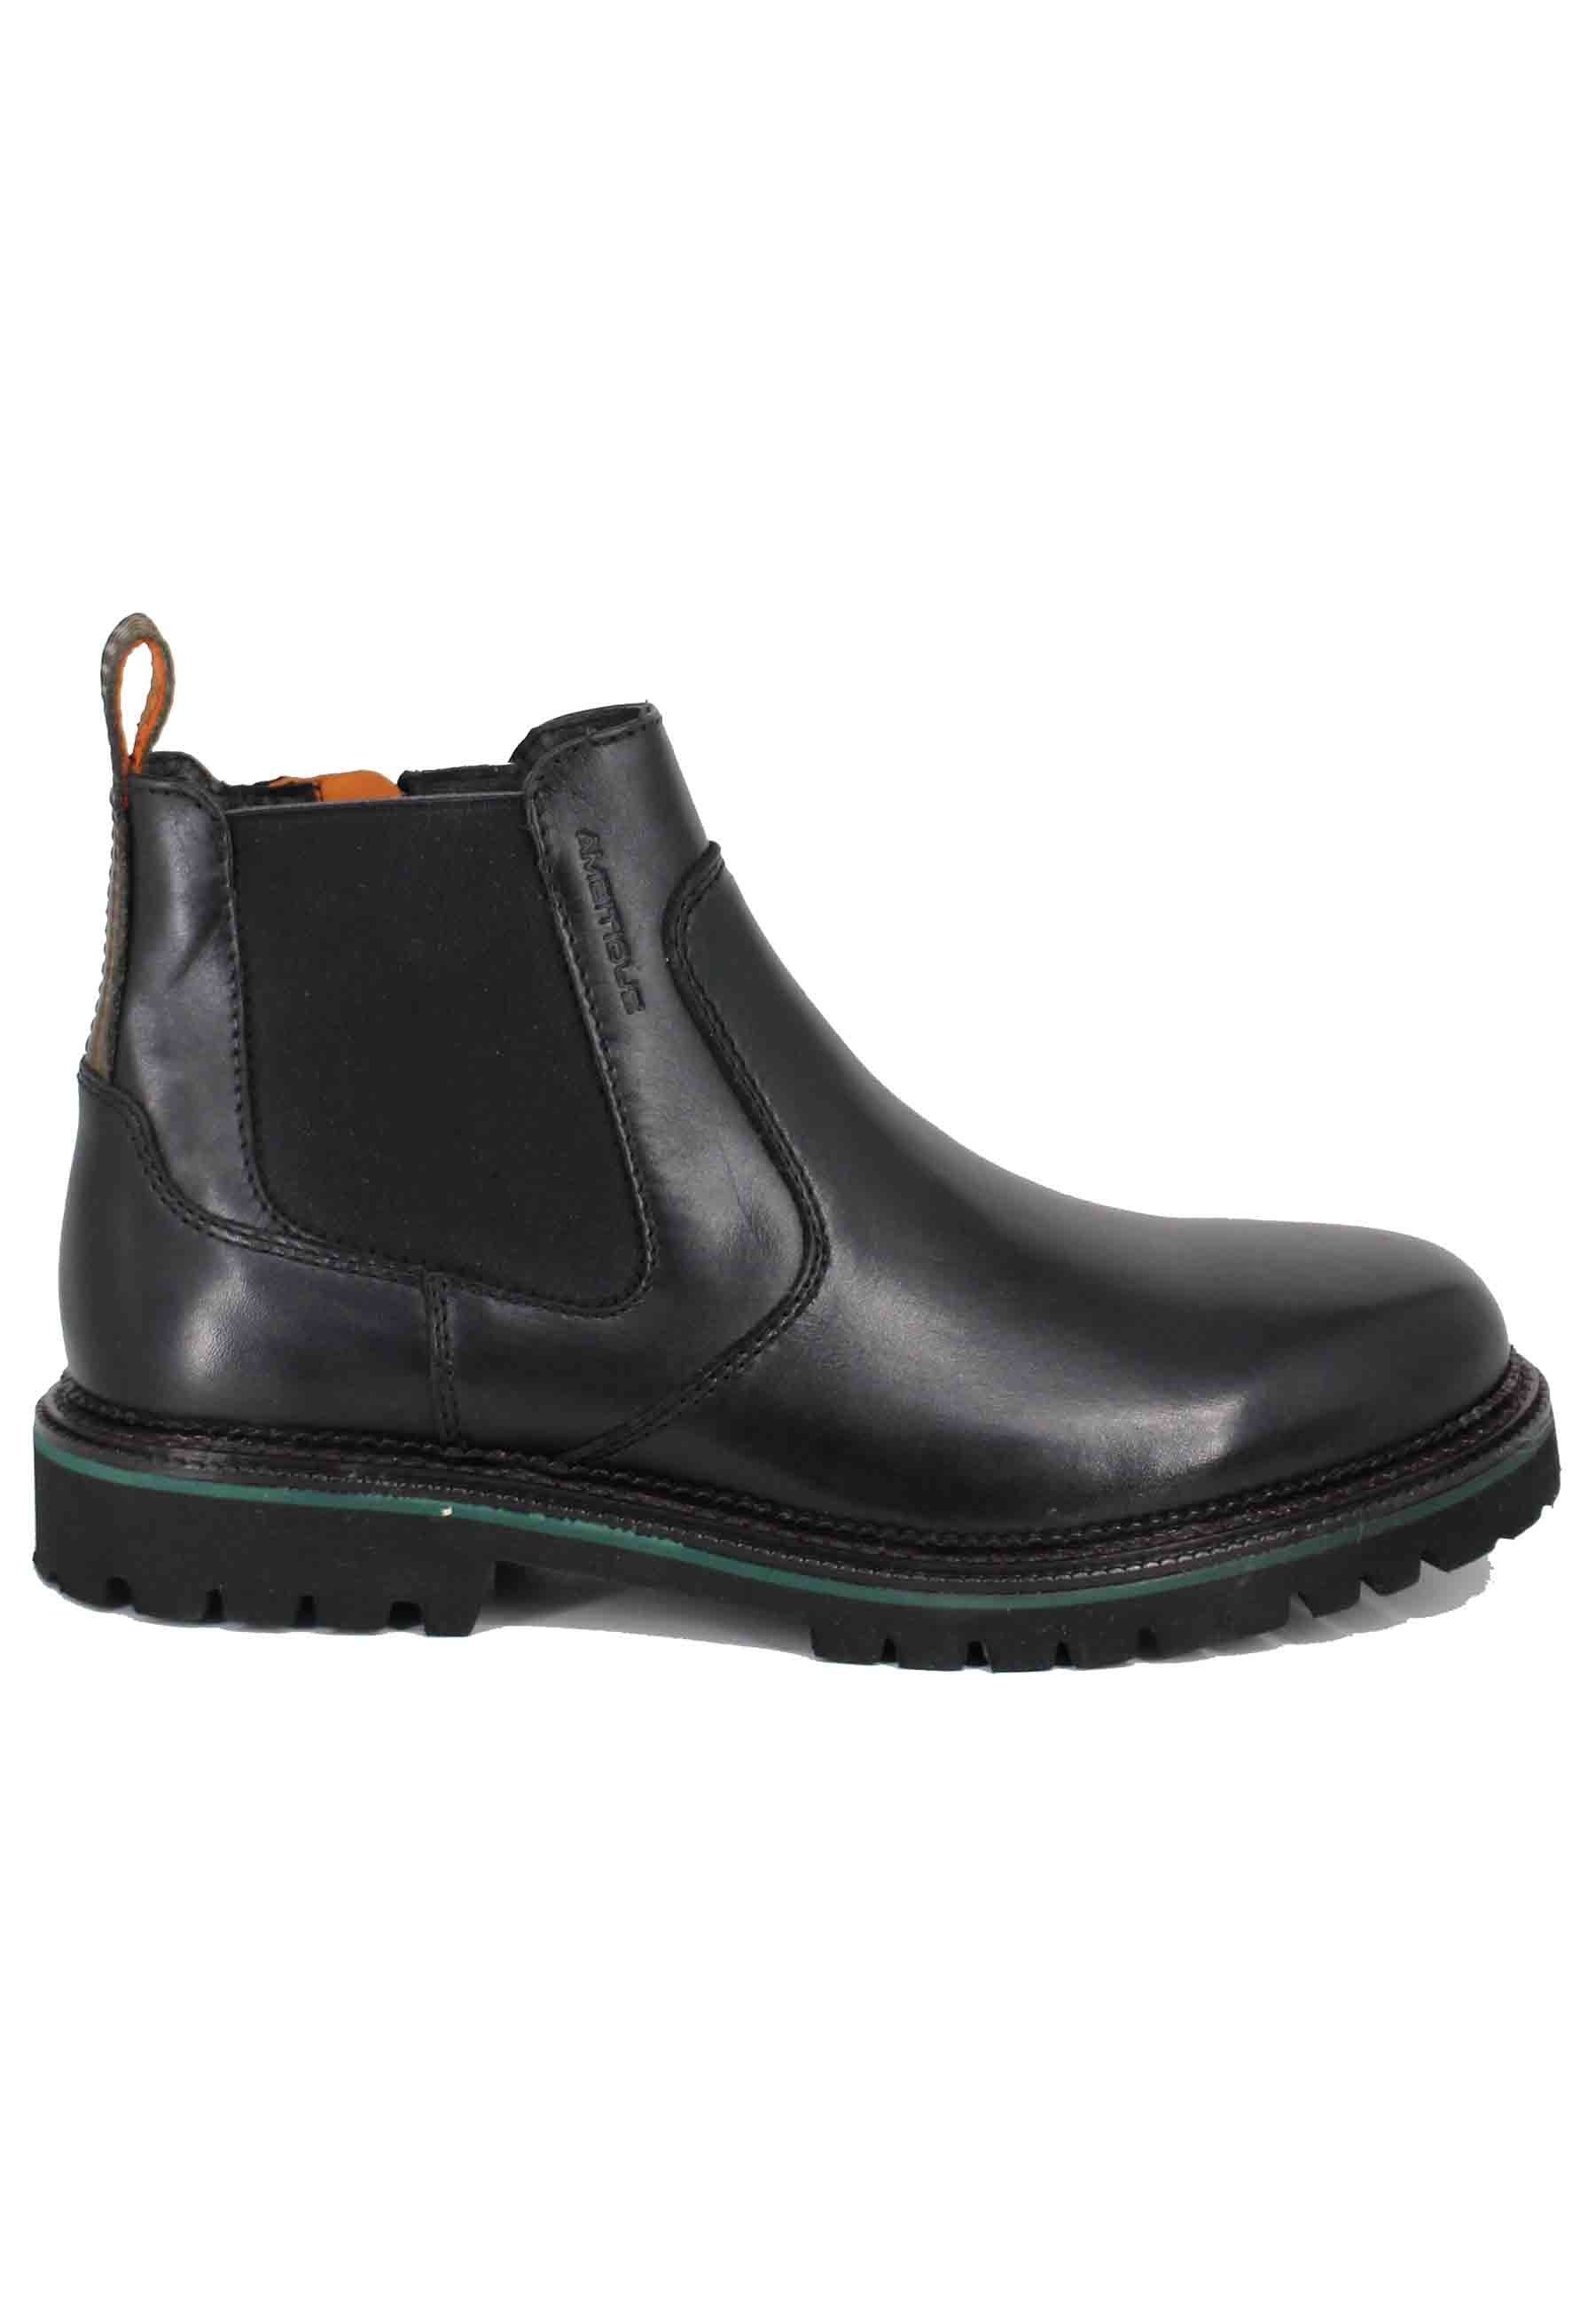 Men's black leather ankle boots with lug sole